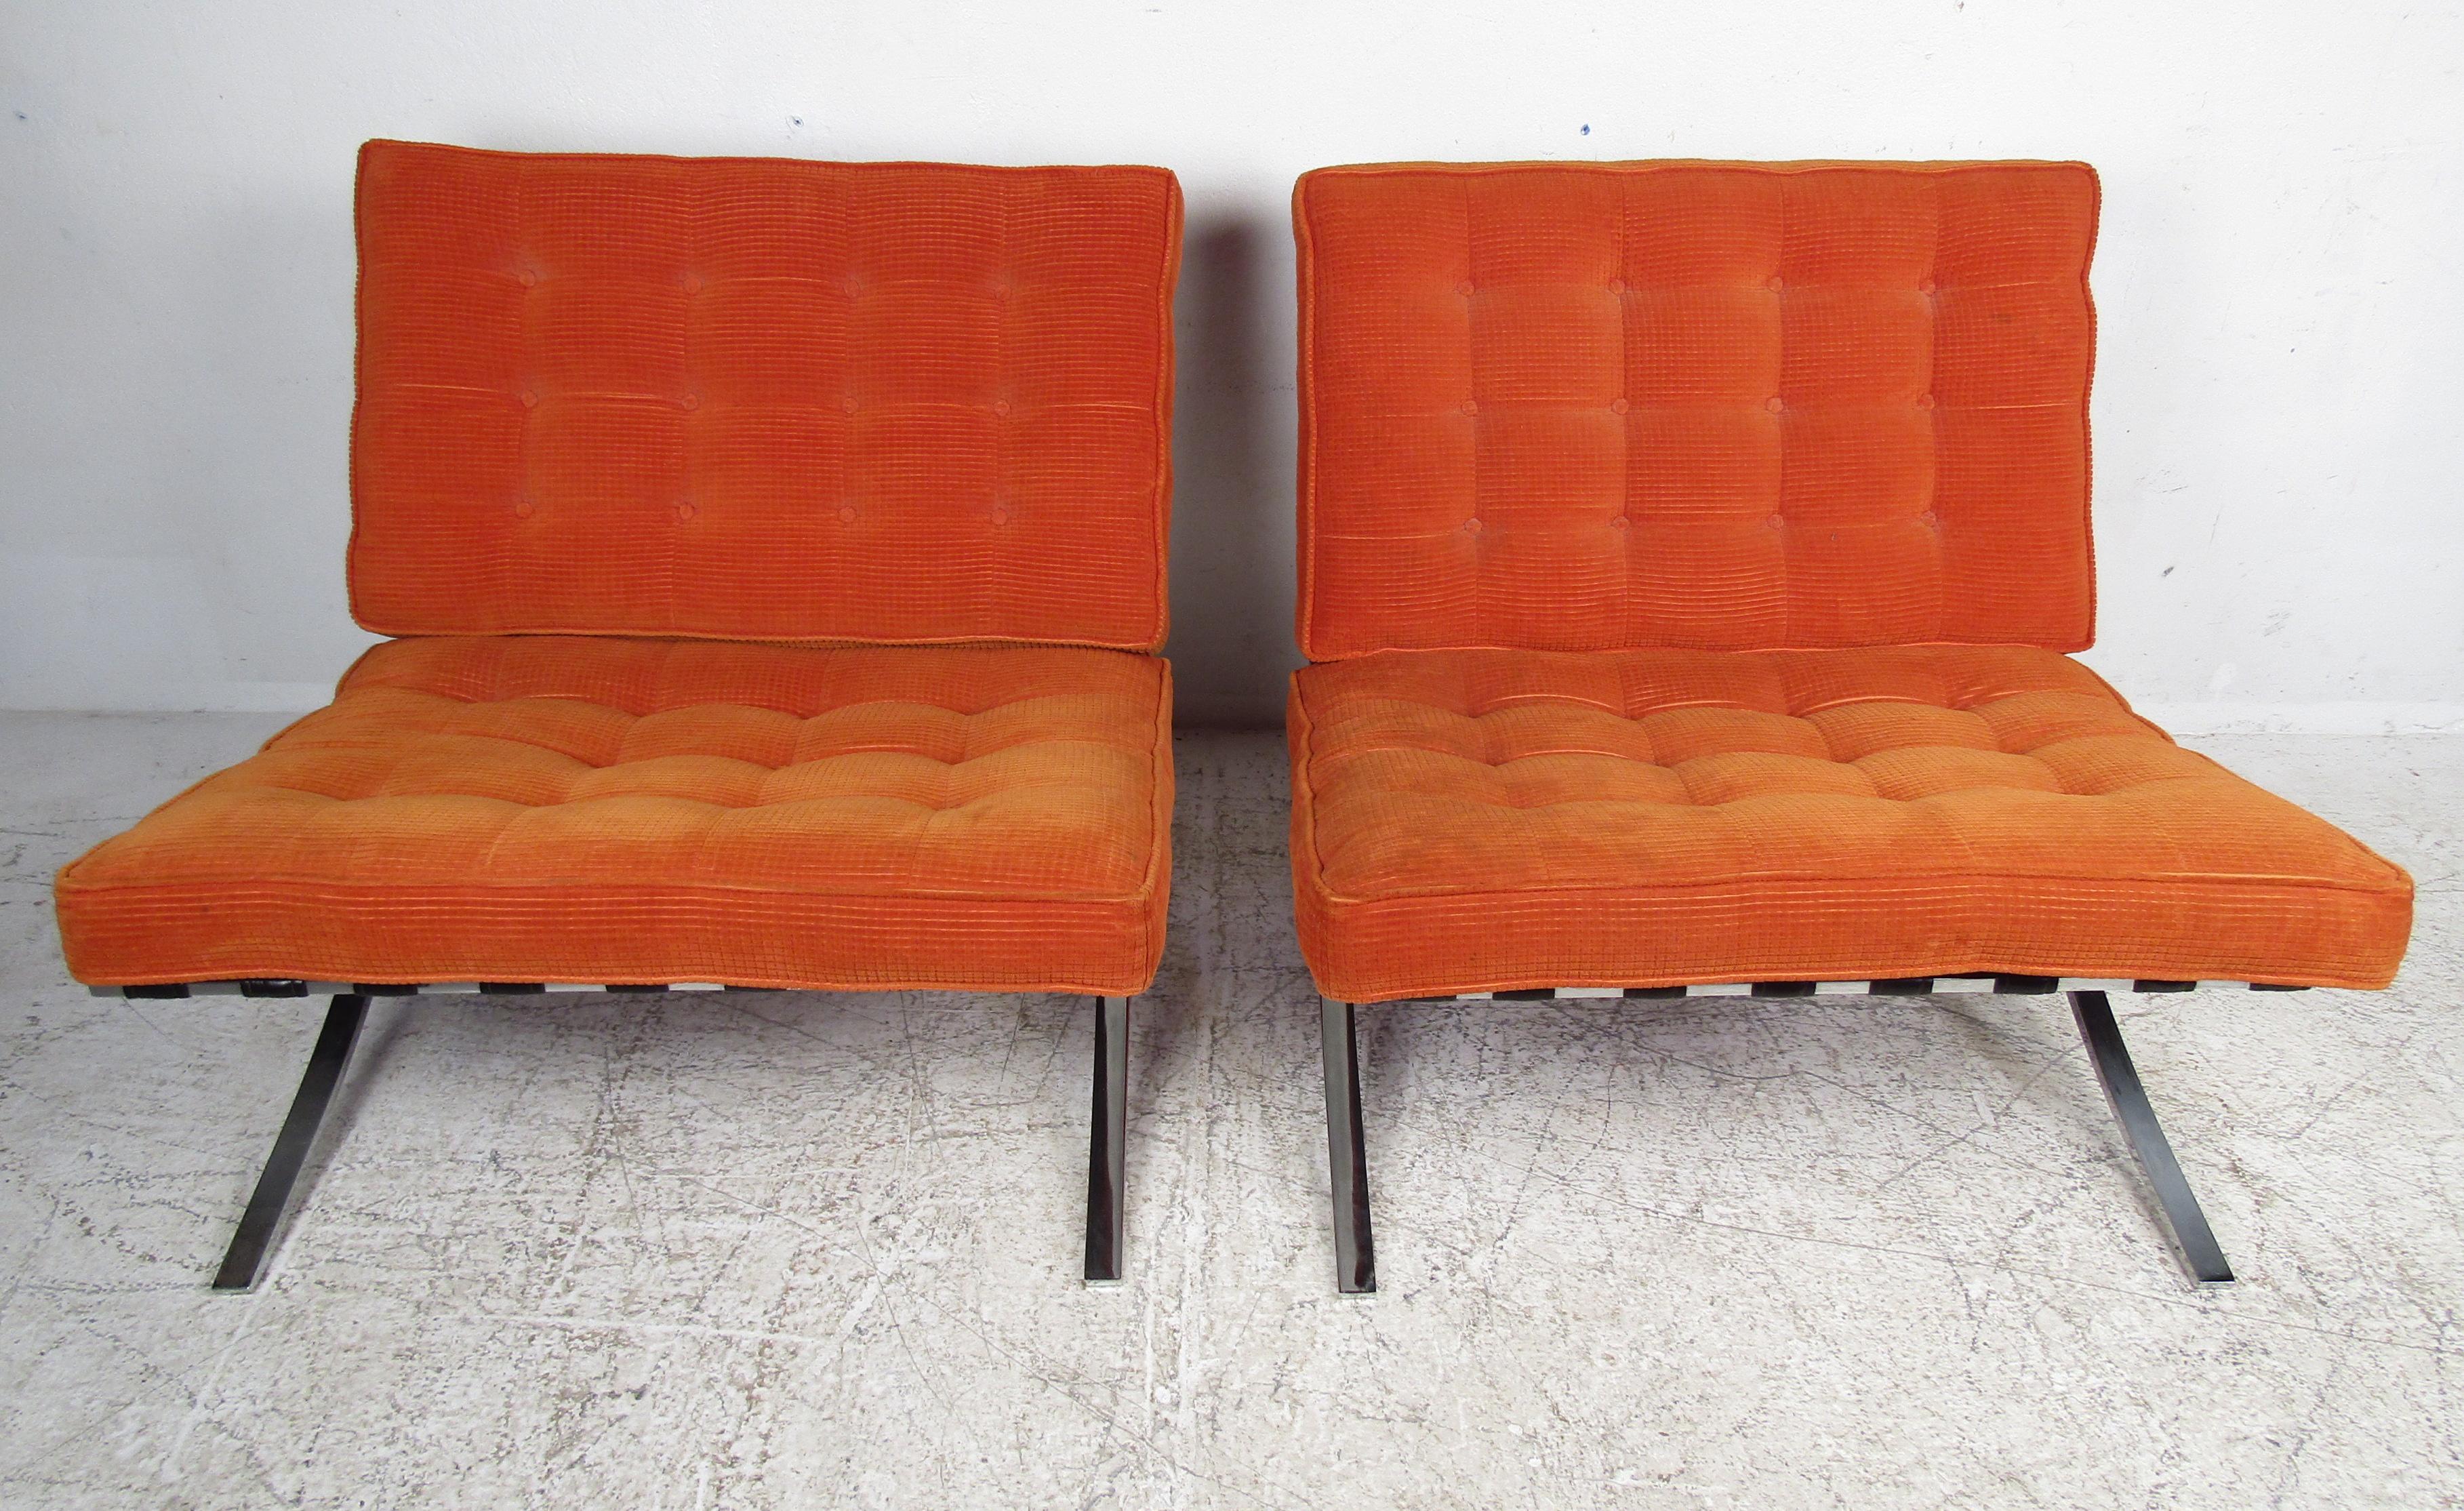 This beautiful pair of contemporary lounge chairs feature a heavy chrome frame with leather straps and thick padded orange cushions. The stylish orange tufted upholstery and 